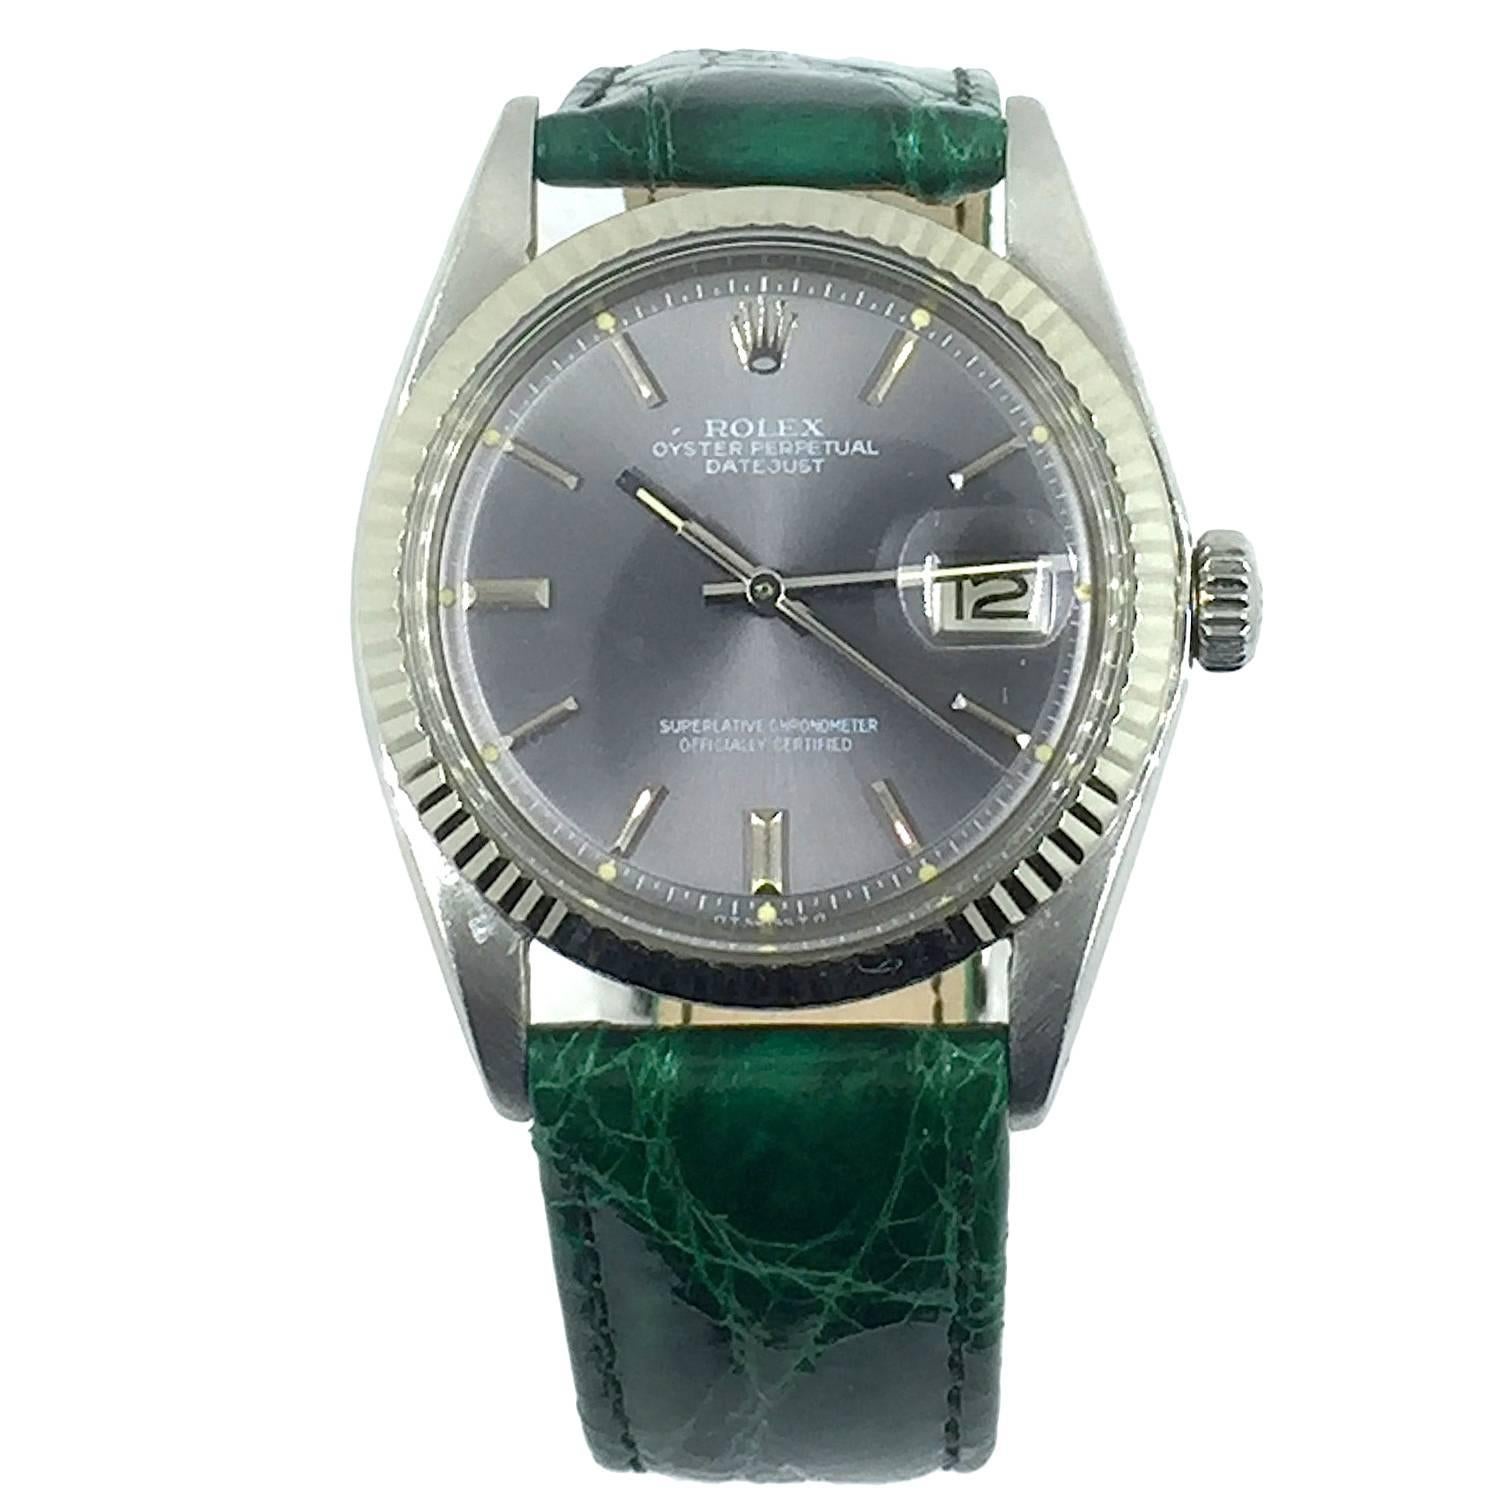 Rolex Vintage Oyster Perpetual Datejust with Grey Dial from 1970s